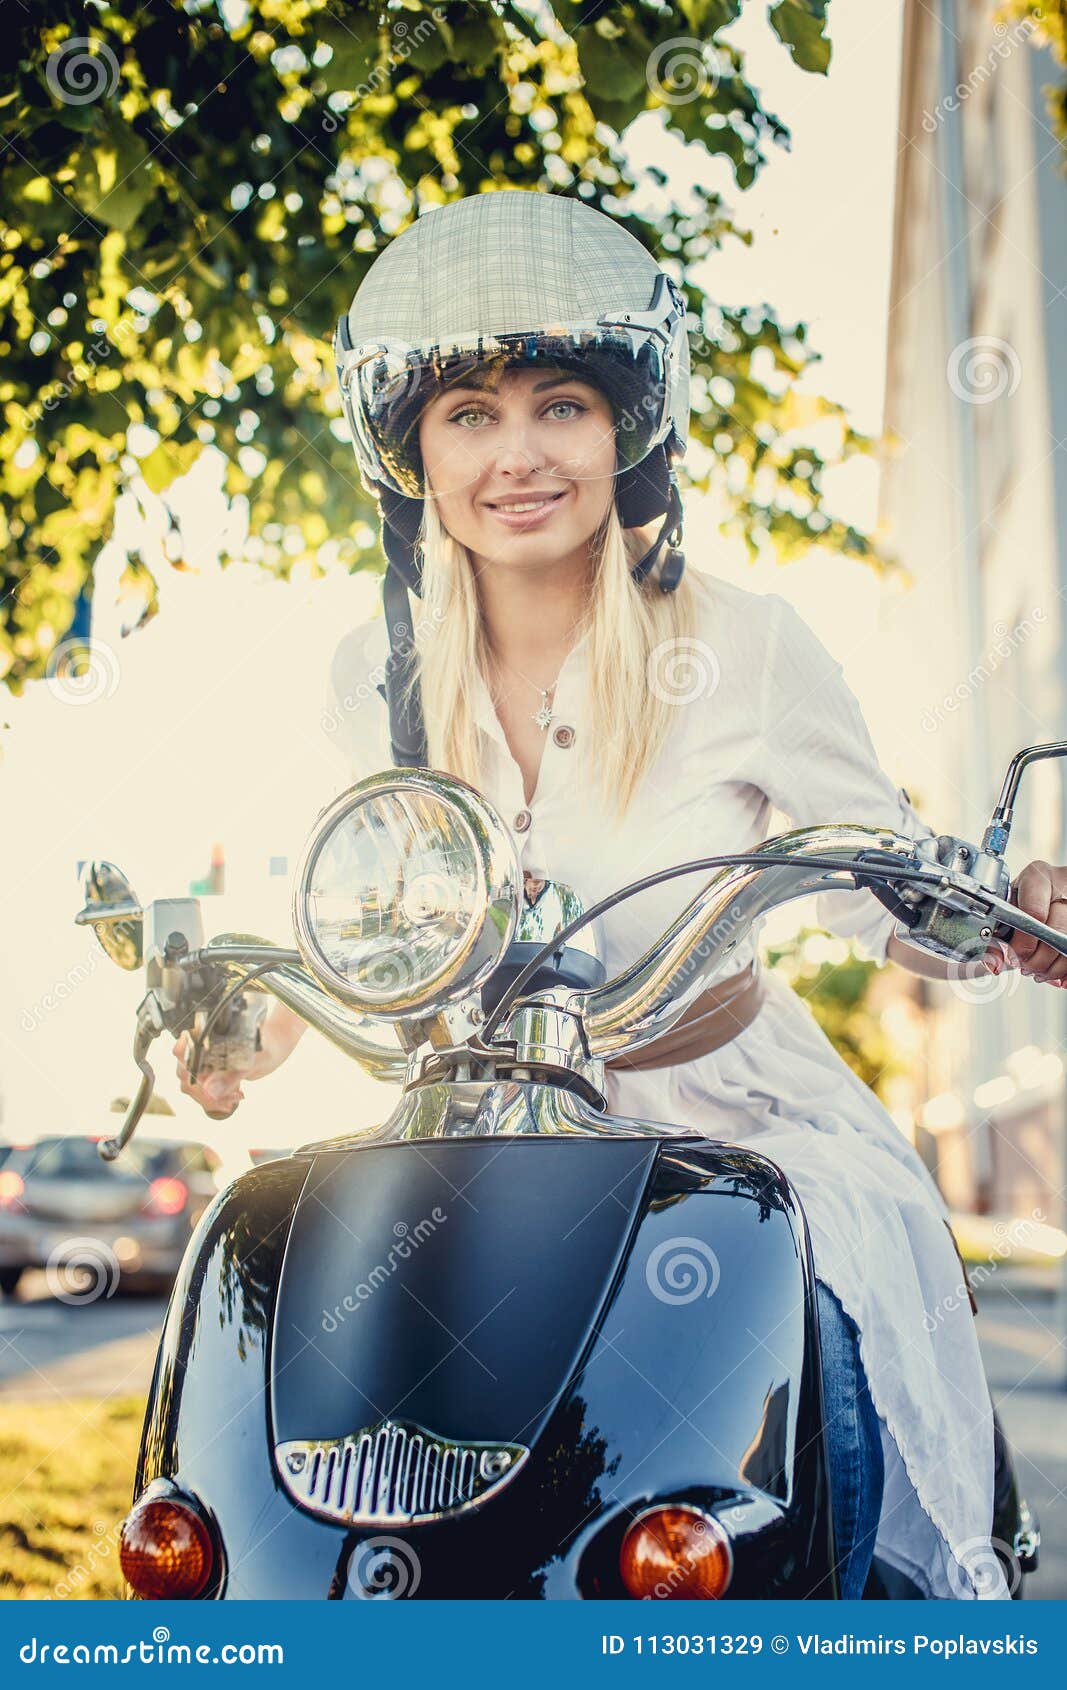 Smiling Blond Female in Jeans, and Helmet Stock Image - of adult, slim: